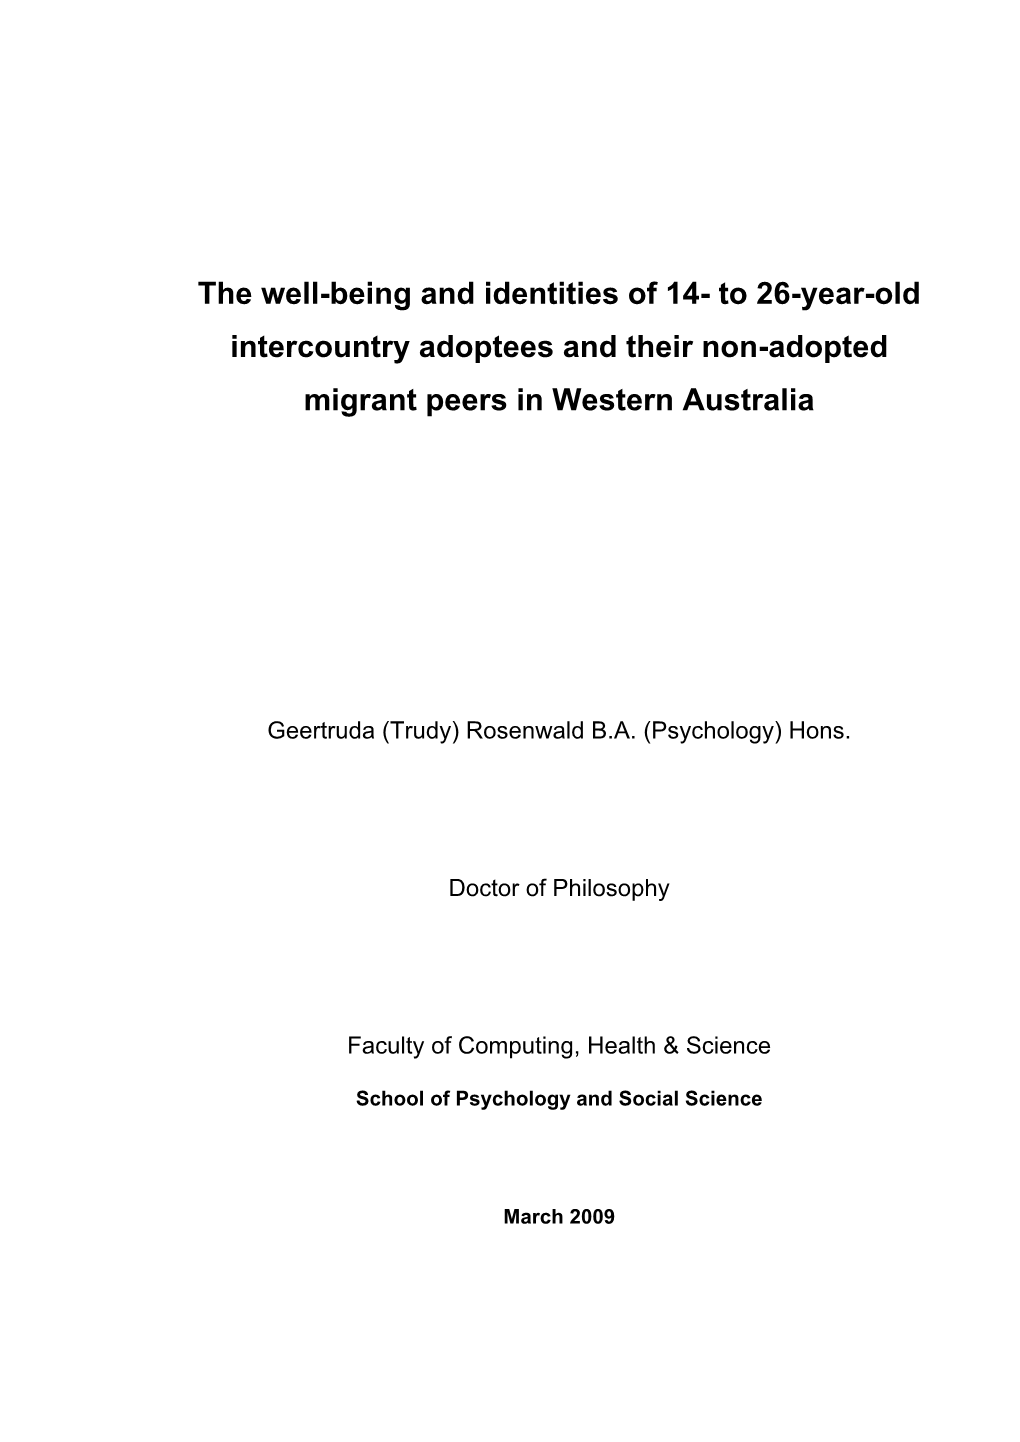 To 26-Year-Old Intercountry Adoptees and Their Non-Adopted Migrant Peers in Western Australia